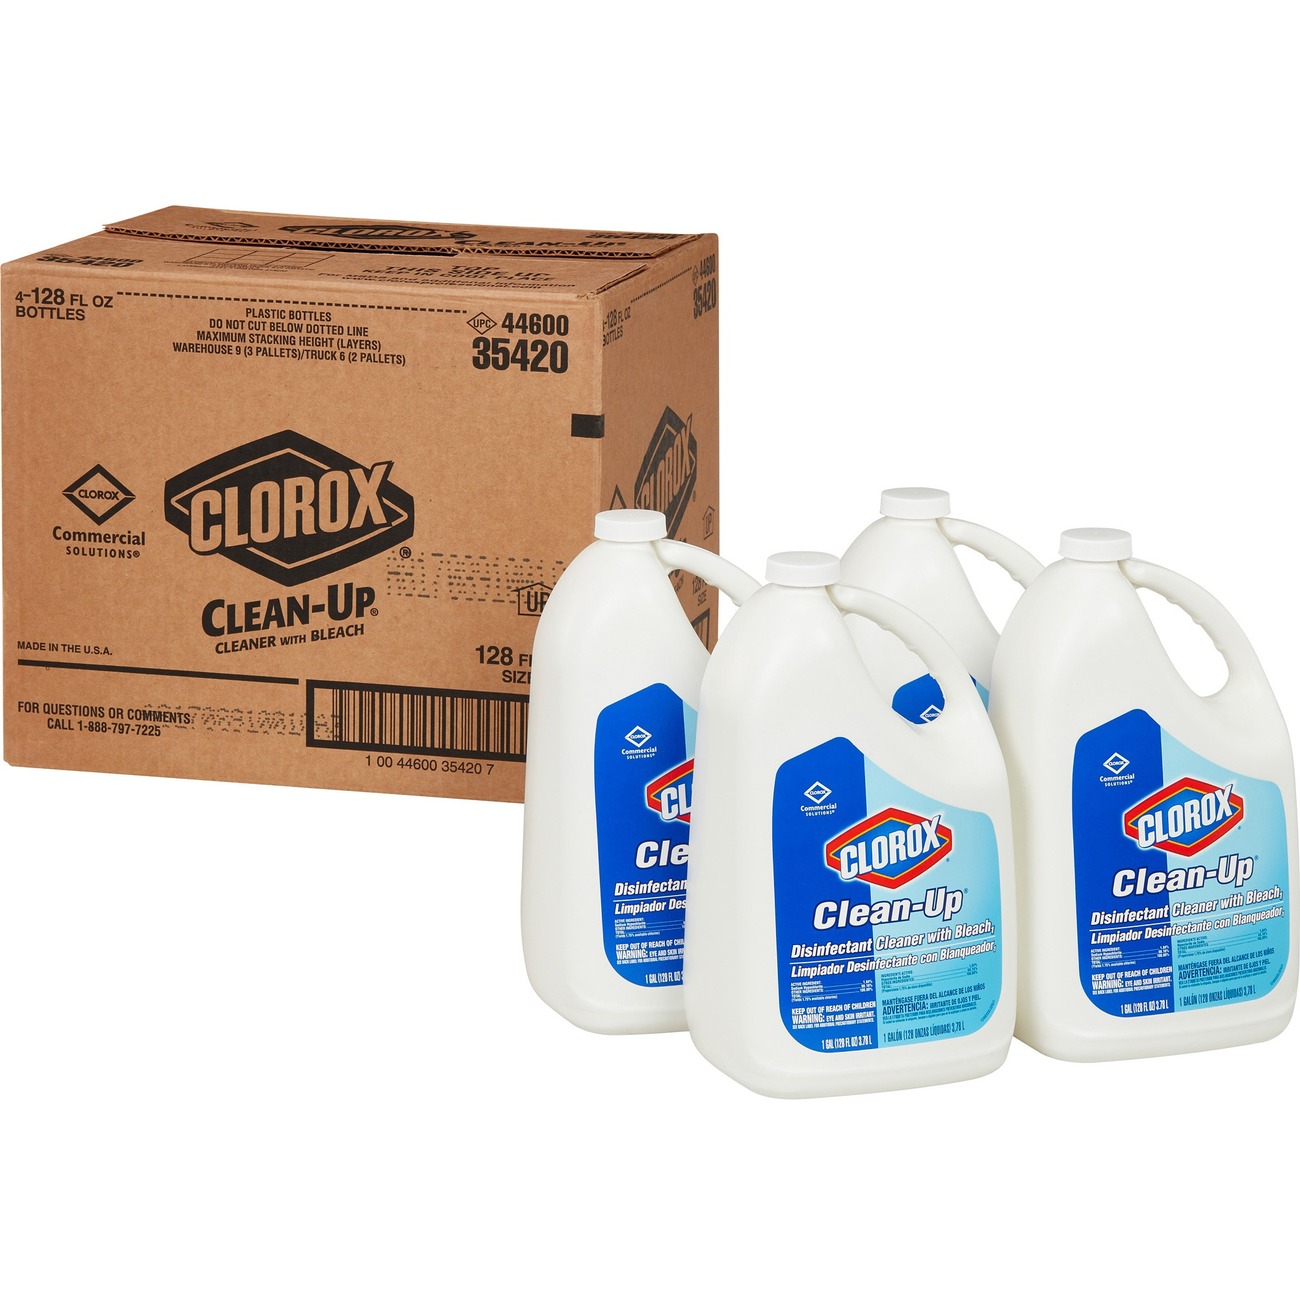 CLOROX CLEAN-UP GALLONS BLEACH DISINFECTANT CLEANER